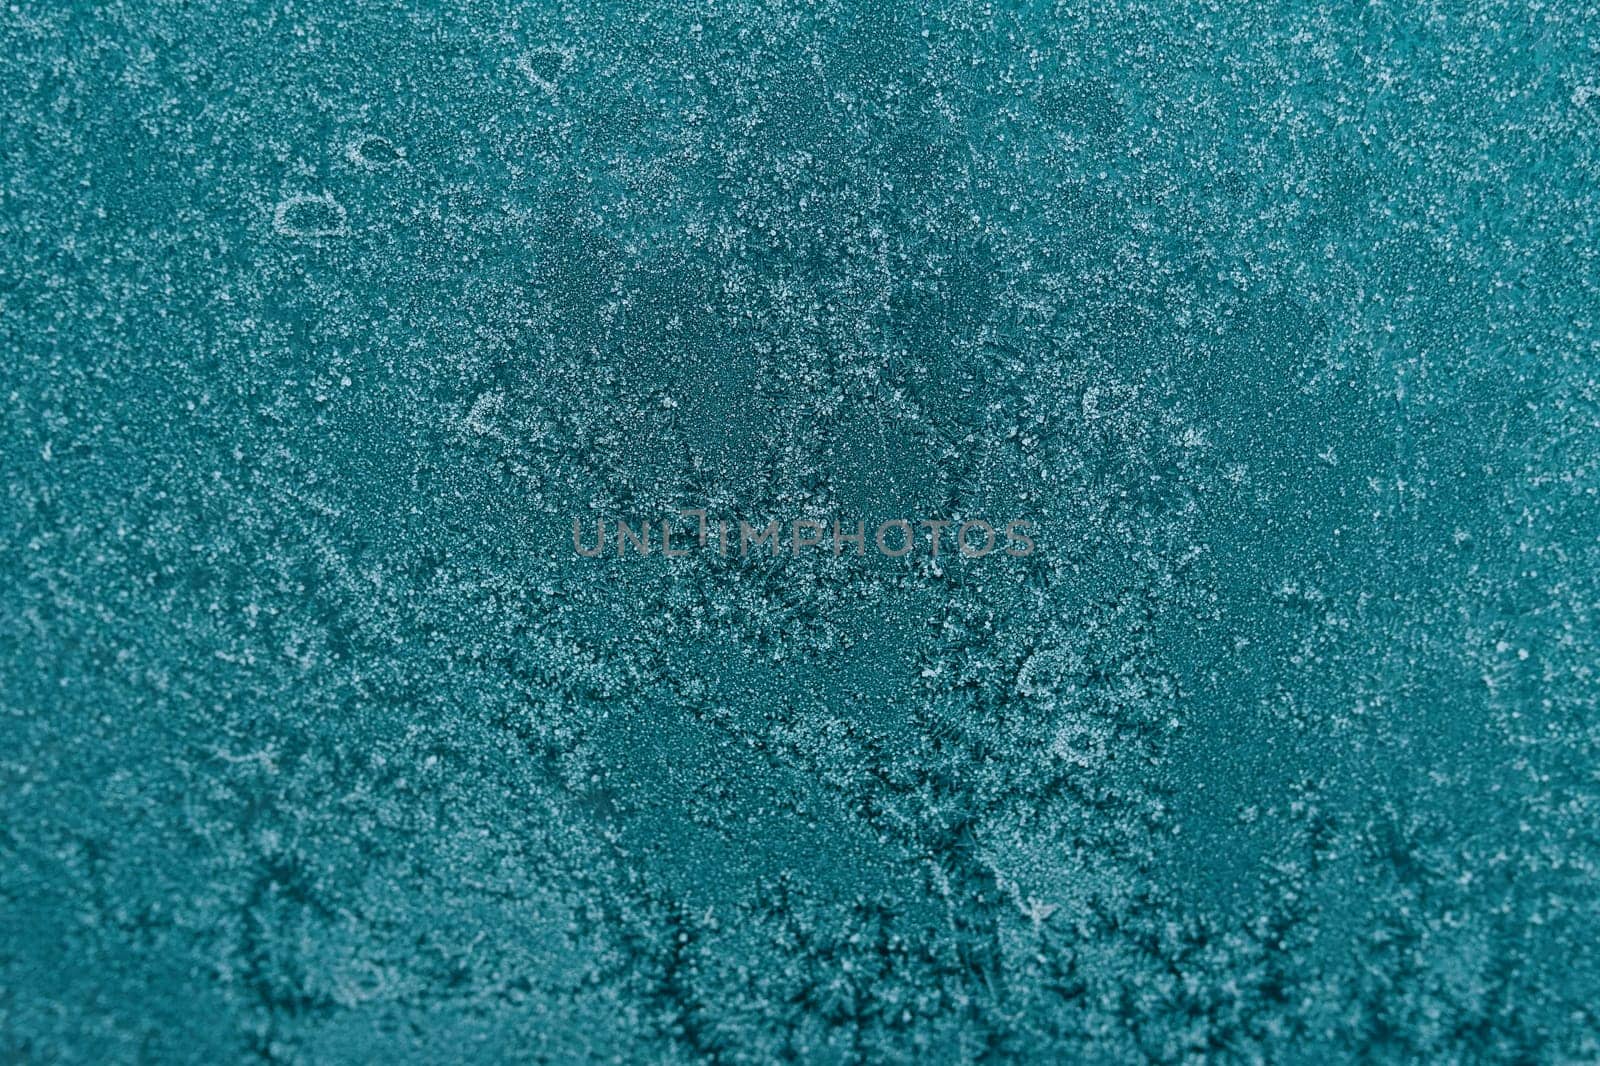 Frozen window. Texture, background for inserting text. New Year theme.